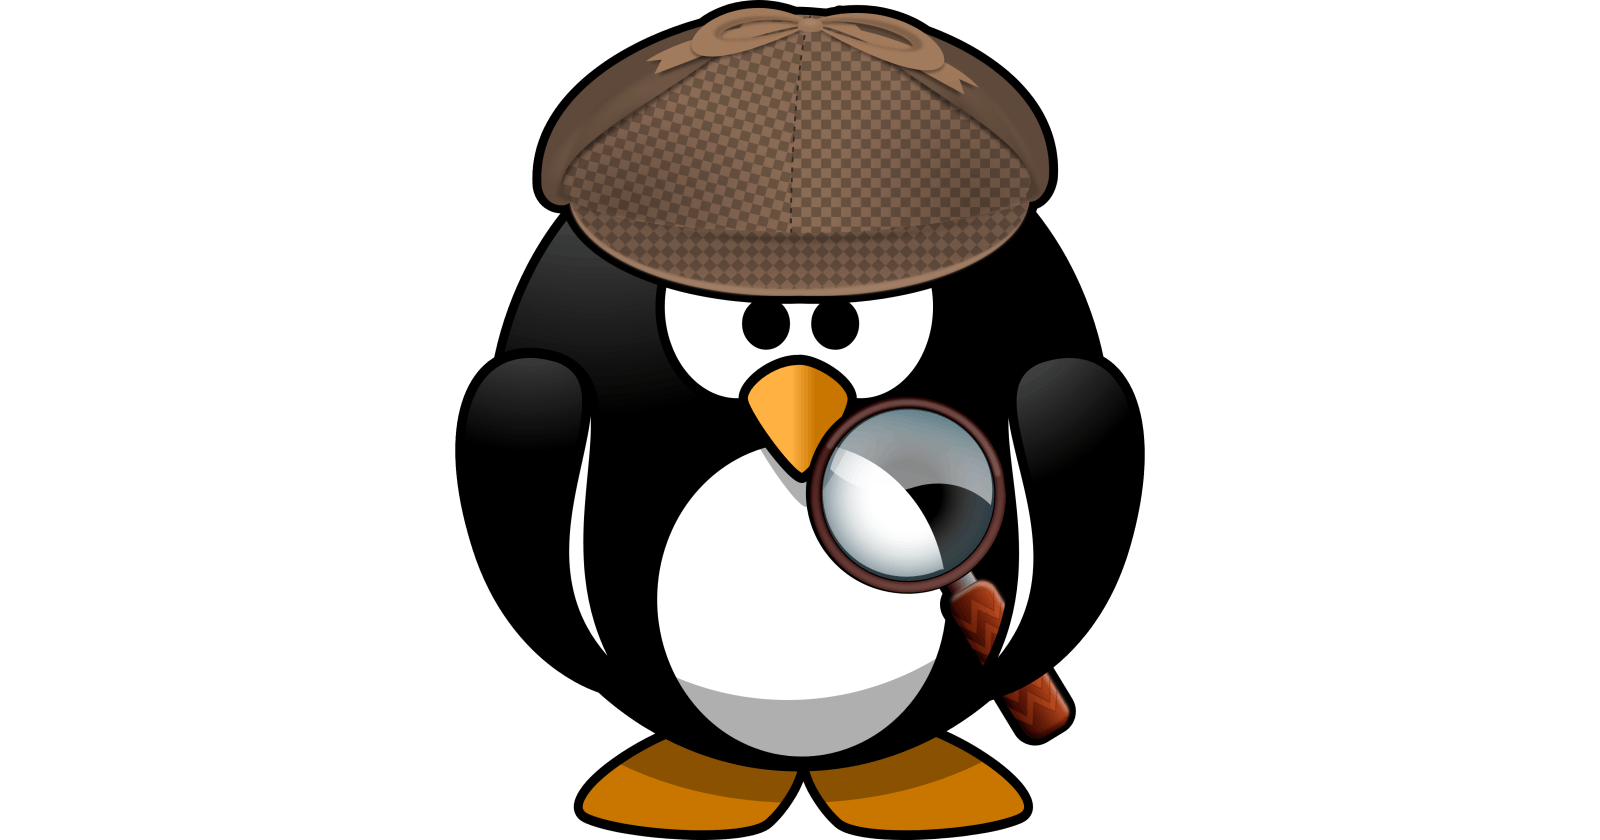 How to use "find" command in Linux